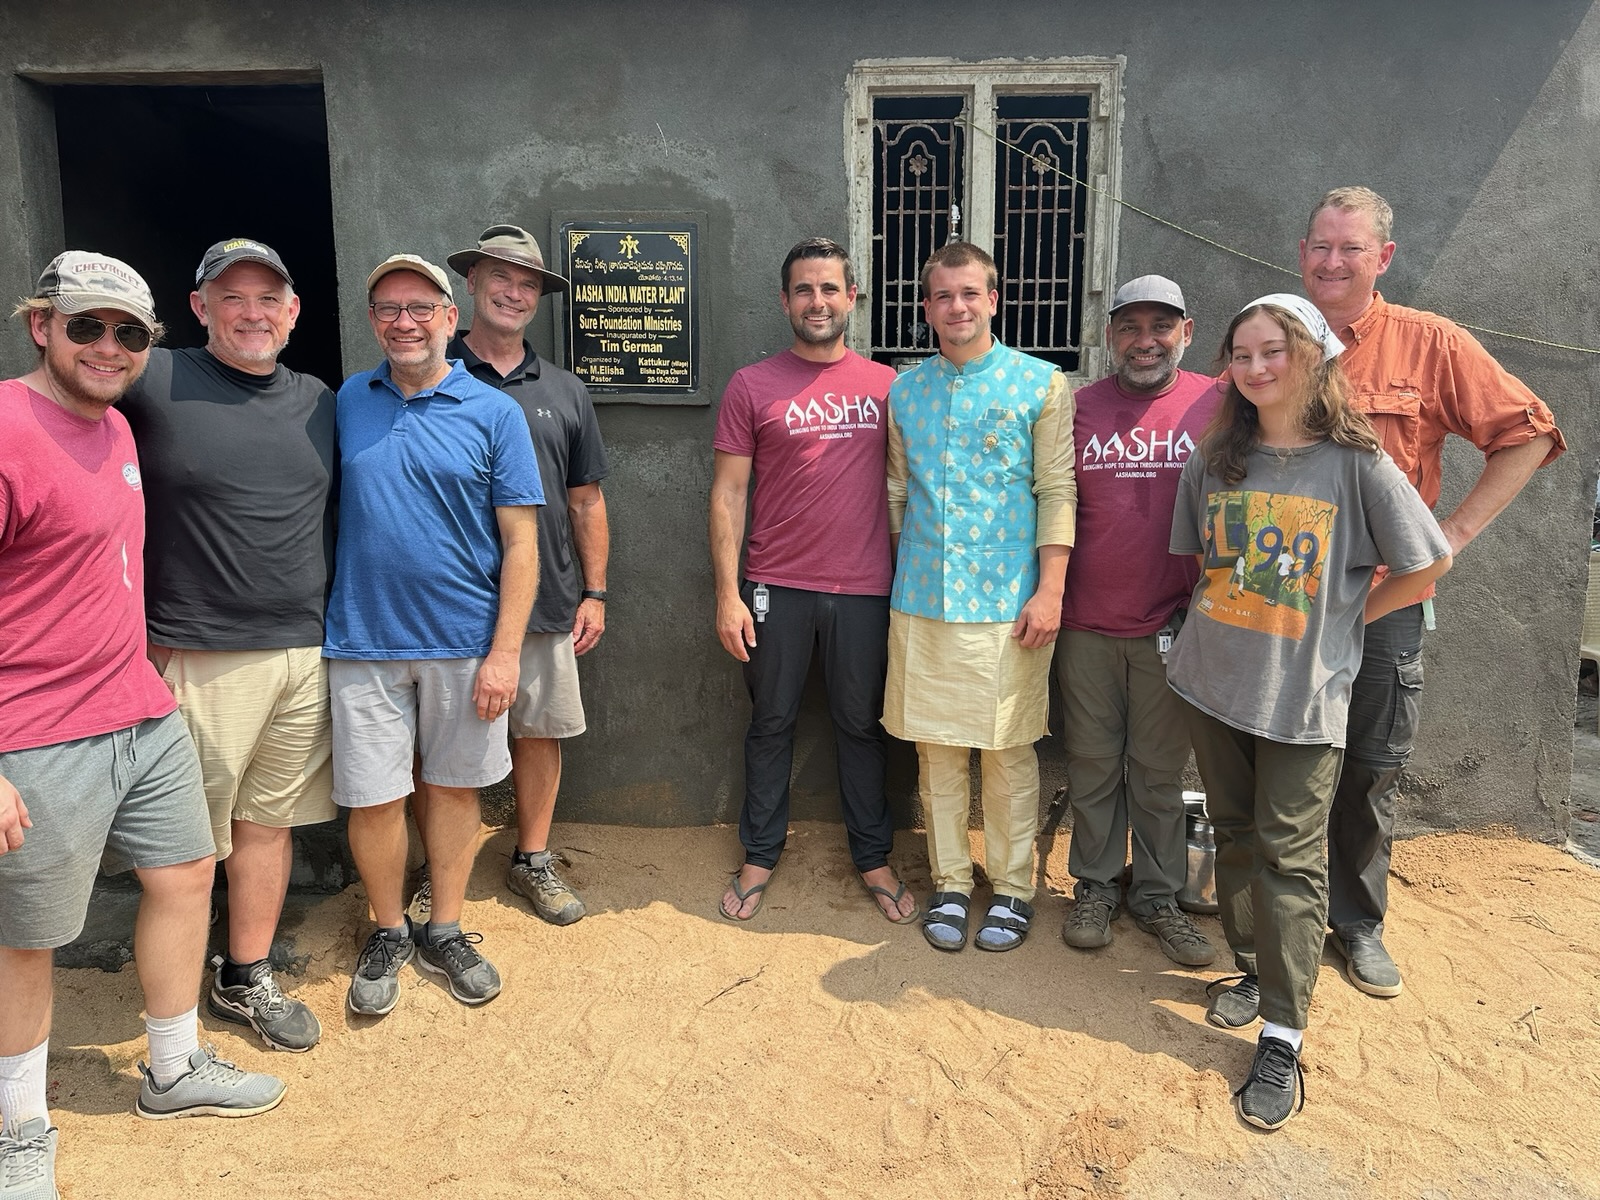 Image of Scott and Brendan with the group of Aasha India volunteers from the U.S.